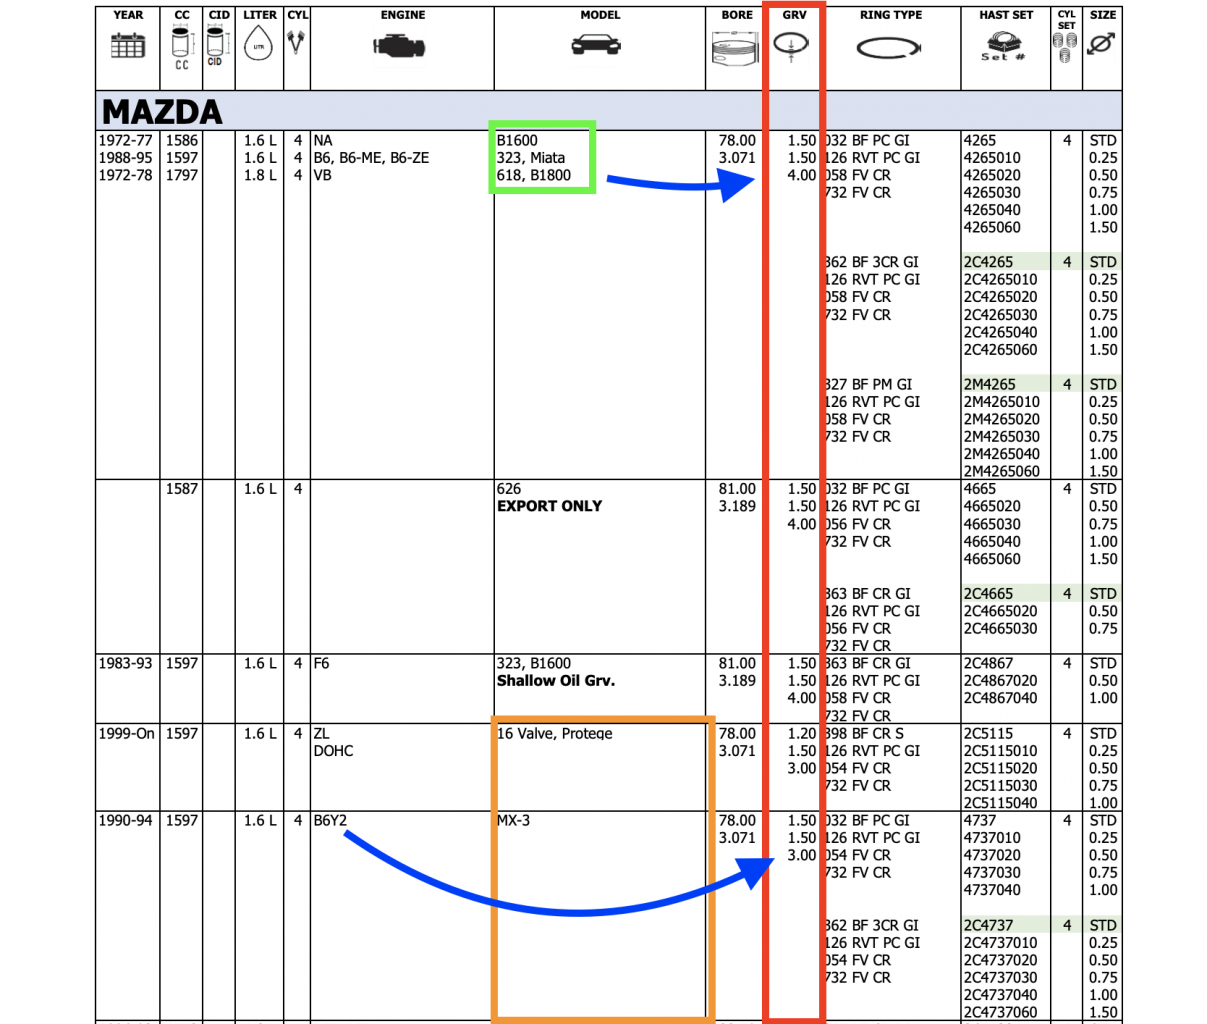 Mazda 1.6L Piston Ring Information and Sizing Differences